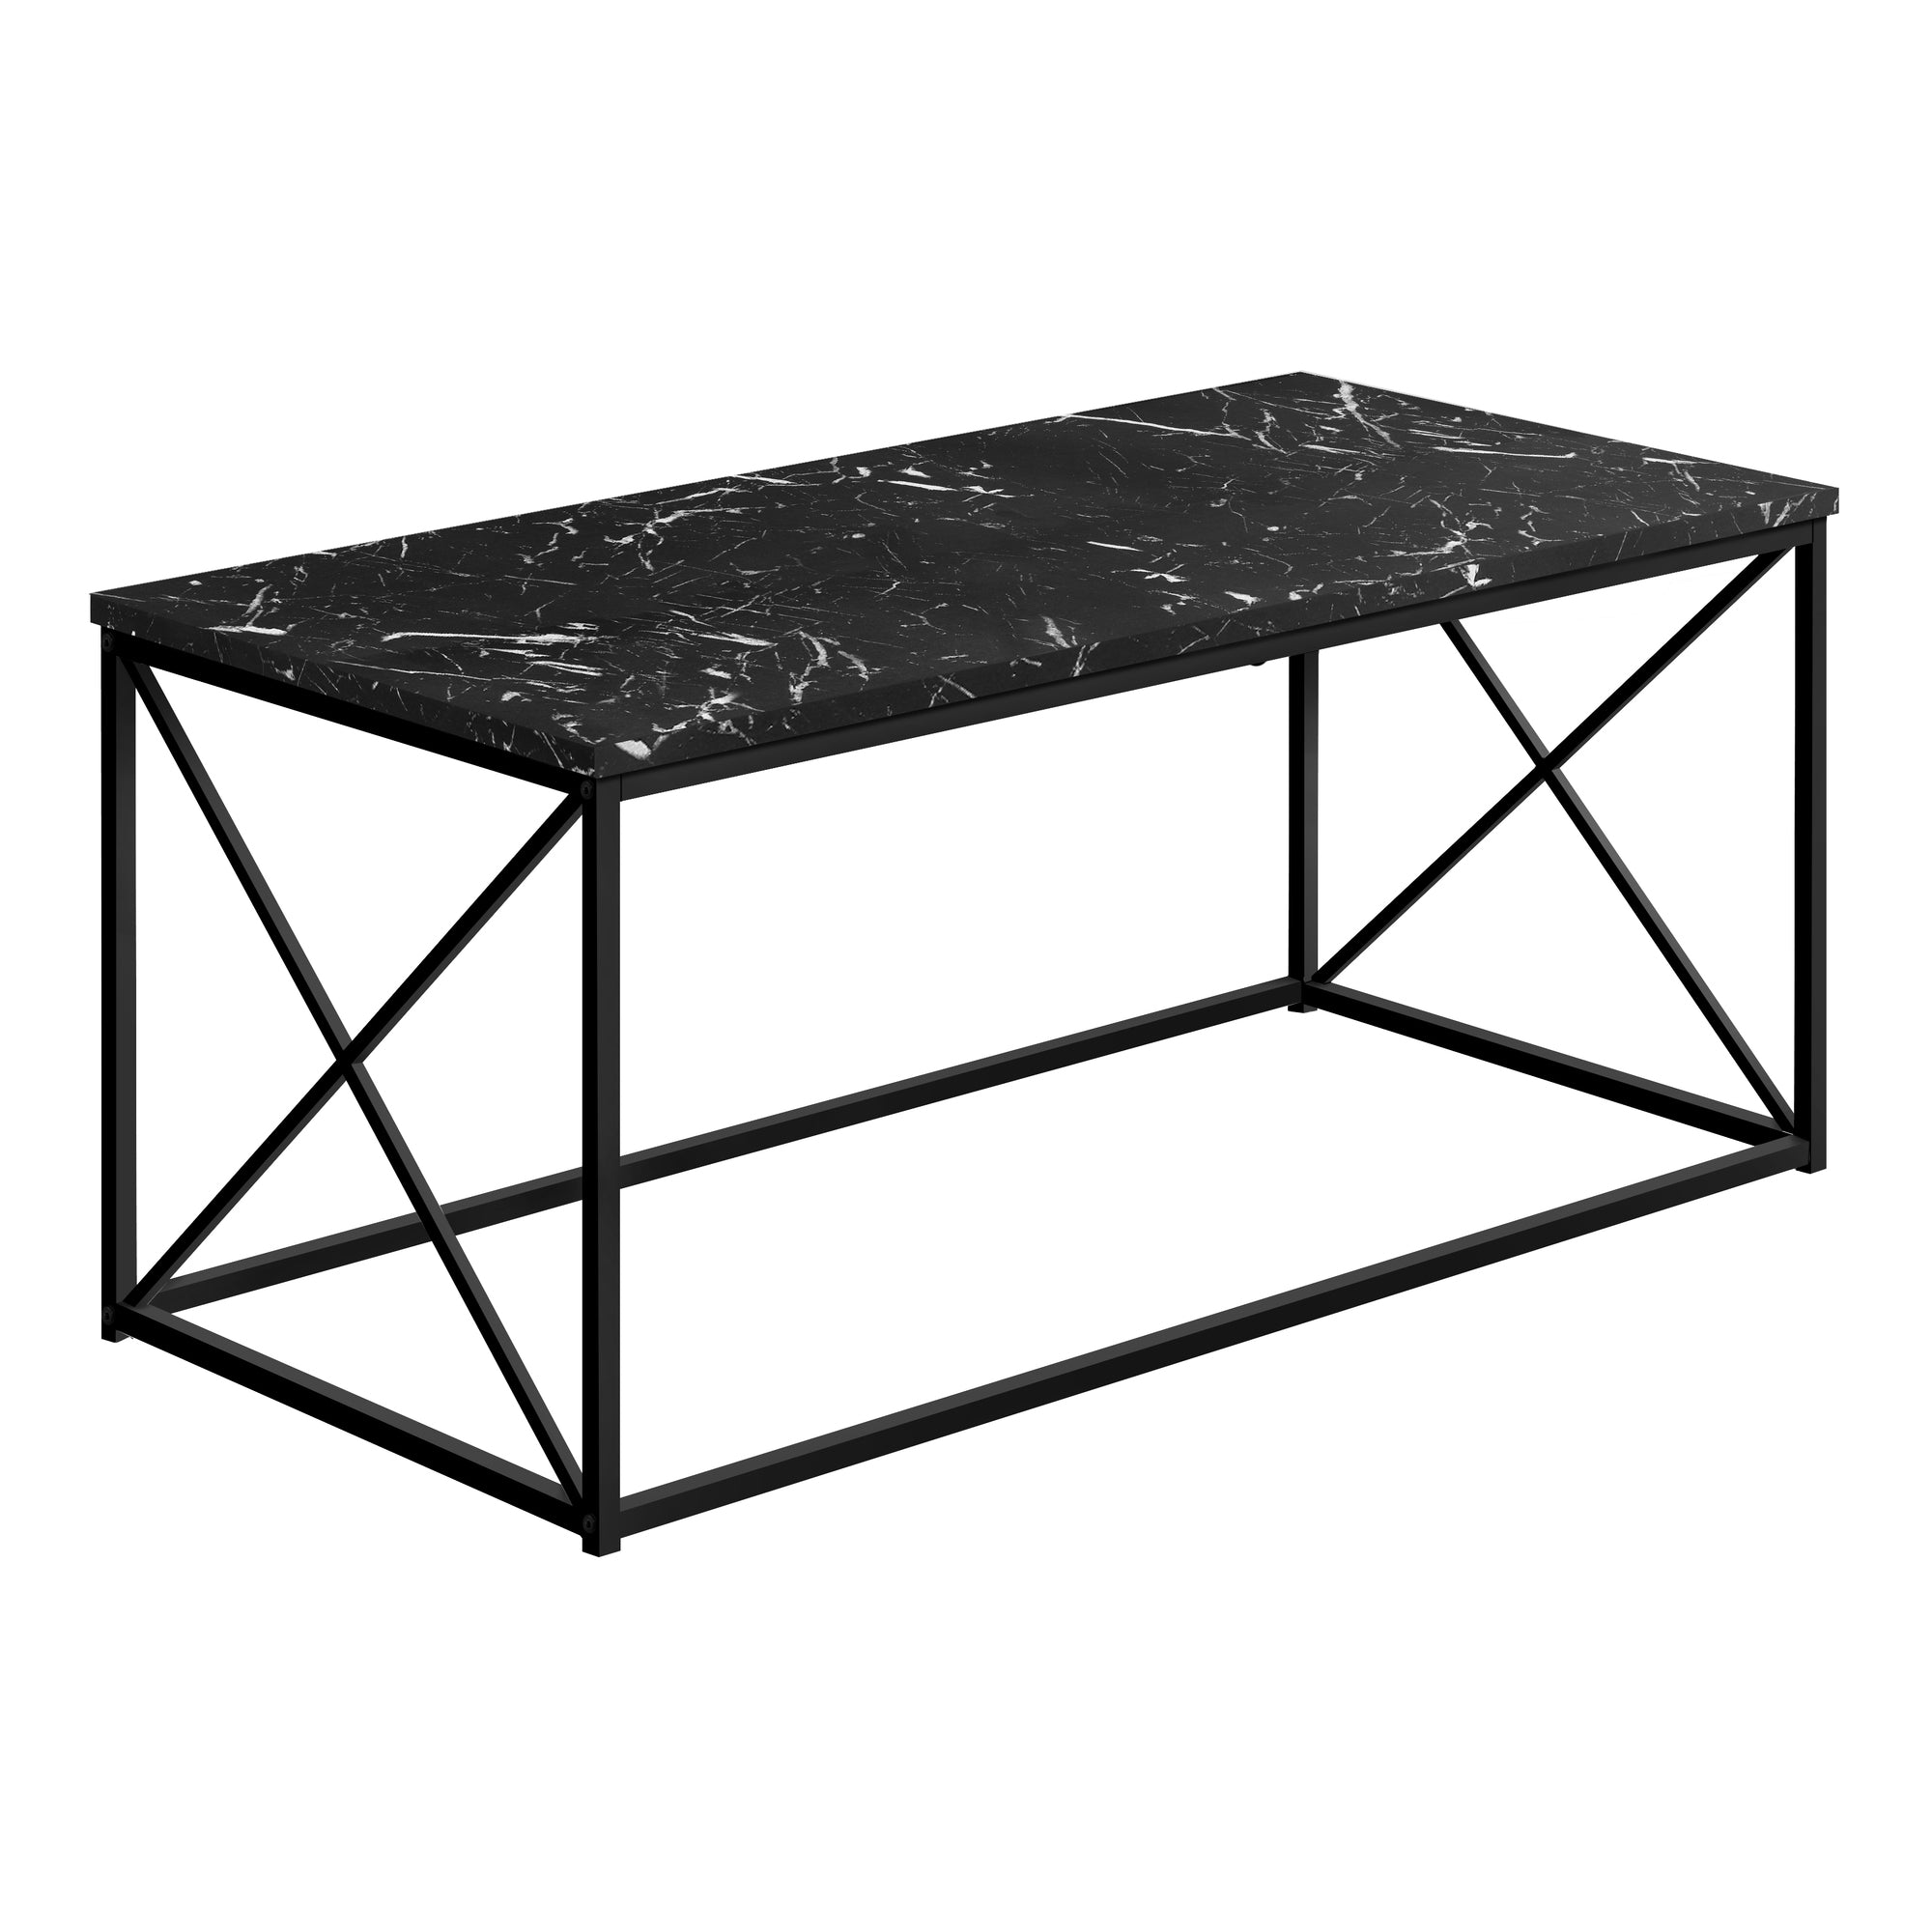 MN-563783    Coffee Table - Rectangular / Metal Base With X-Shaped Sides - 40"L - Black Marble-Look / Black